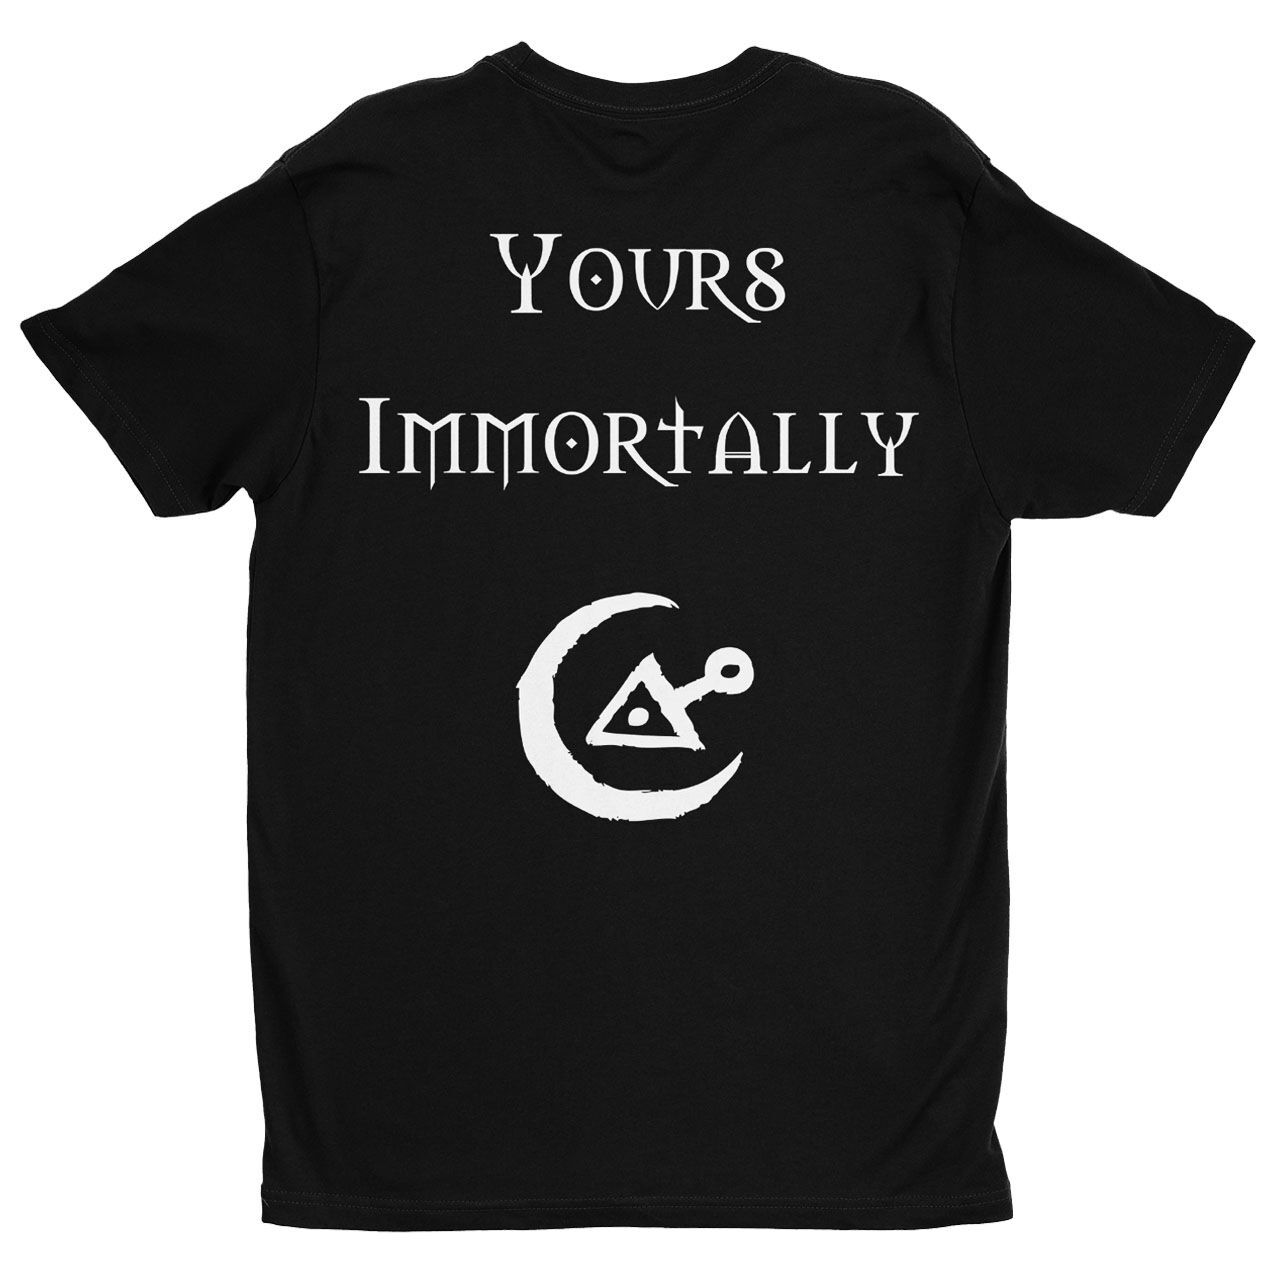 CRADLE OF FILTH Yours Immortally Tshirt